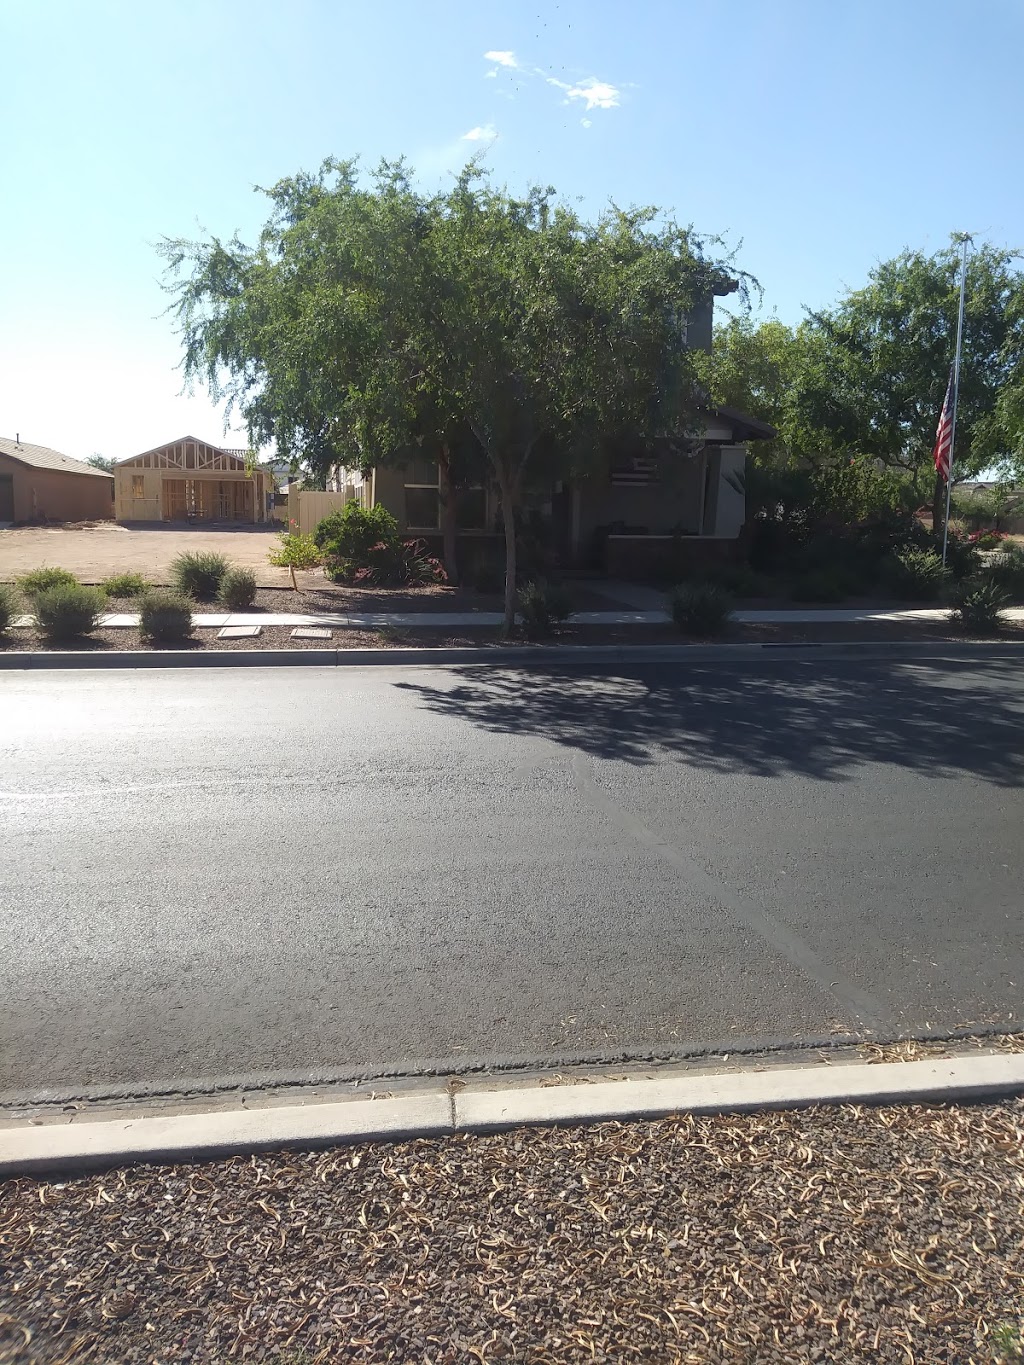 Shebang Realty | 14824 W Voltaire St, Surprise, AZ 85379, USA | Phone: (623) 476-1695